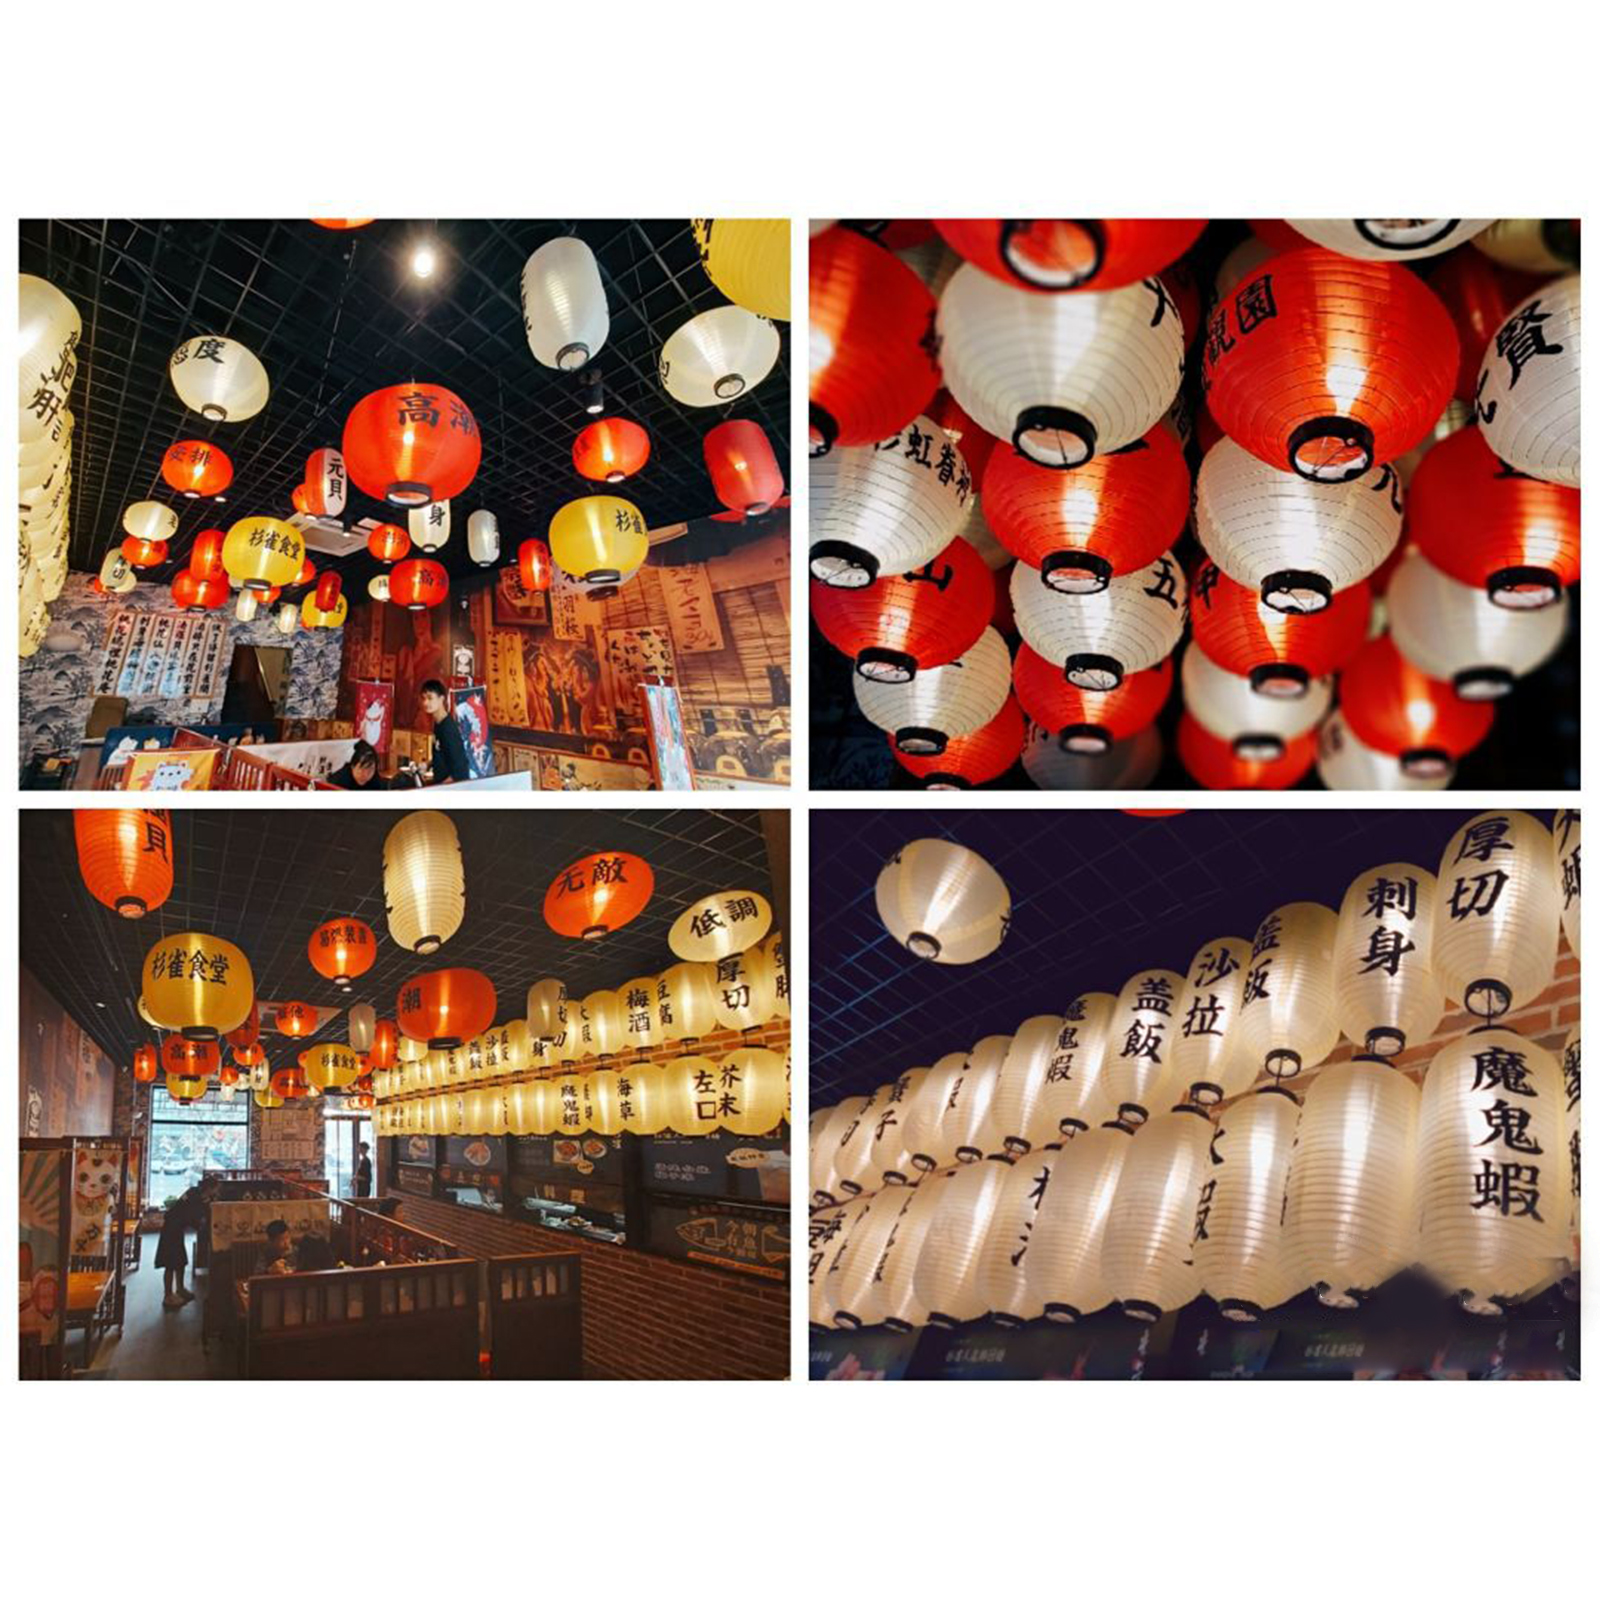 Lantern Satin Waterproof Decorations Foldable Japanese for Home Pub Festival 6 inch White B